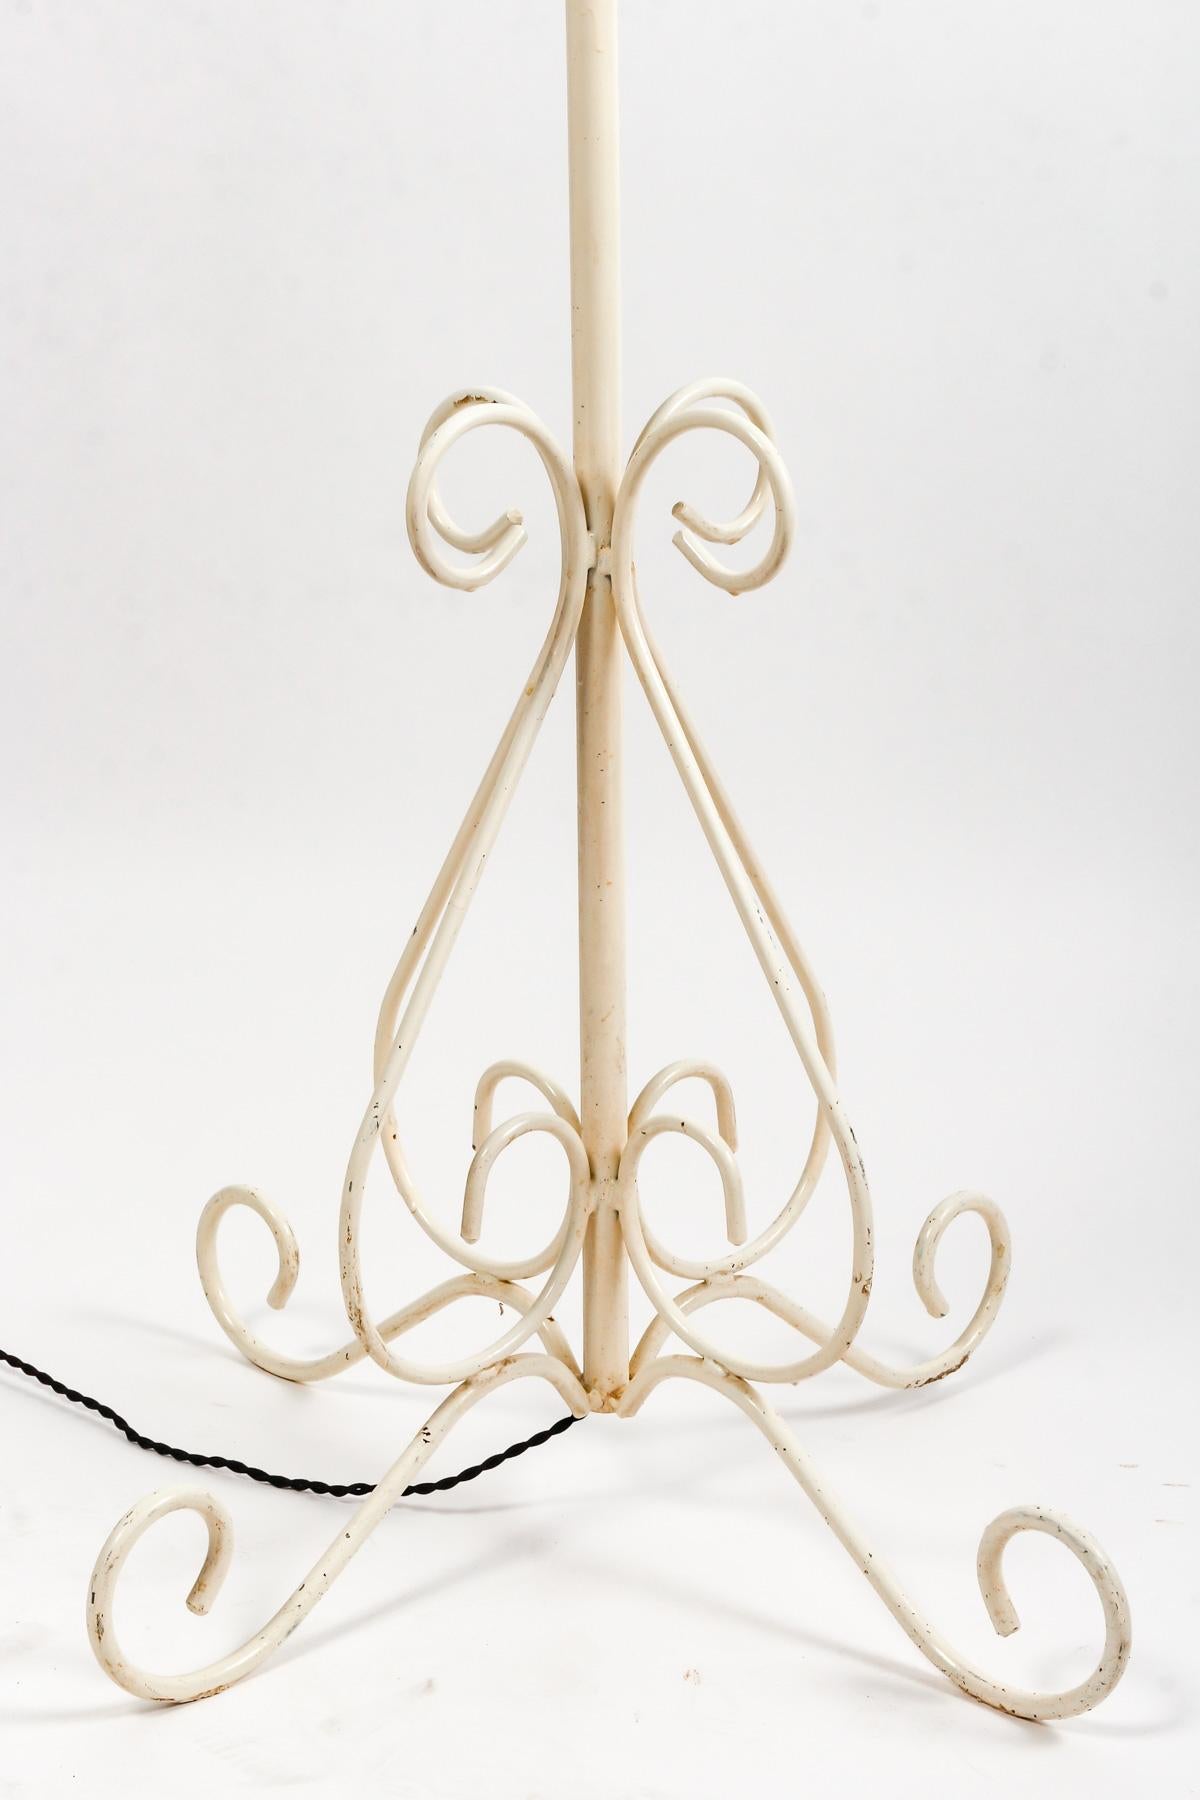 Floor lamp in Painted Wrought Iron by Maison R.Gleizes, 1950-1960 Design. For Sale 1